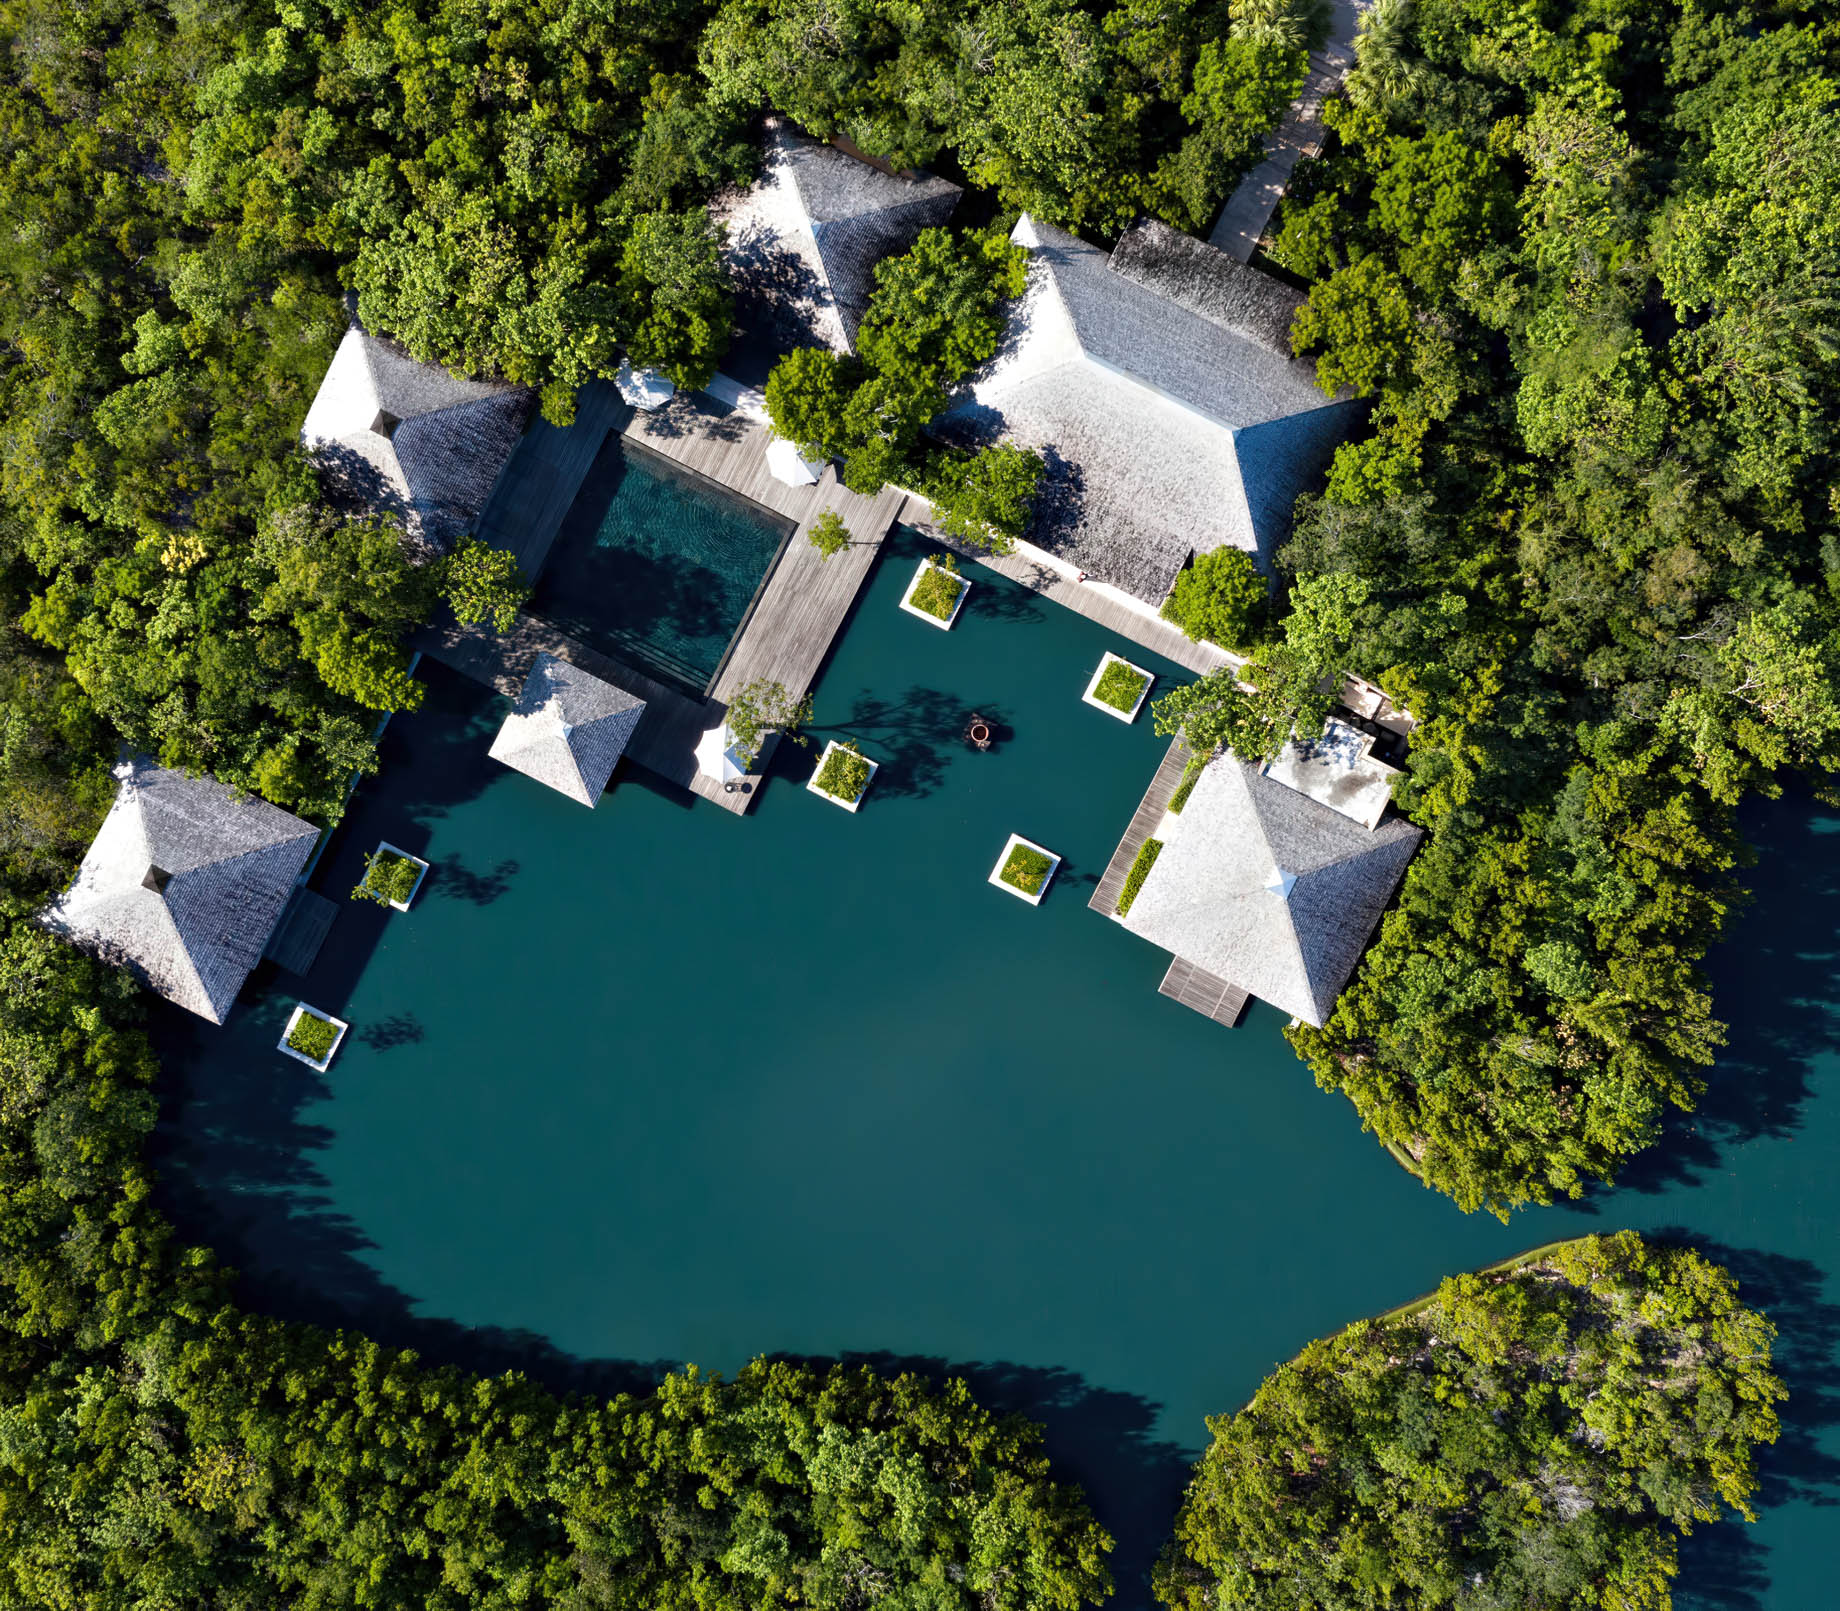 Amanyara Resort – Providenciales, Turks and Caicos Islands – Overhead Relecting Pond View